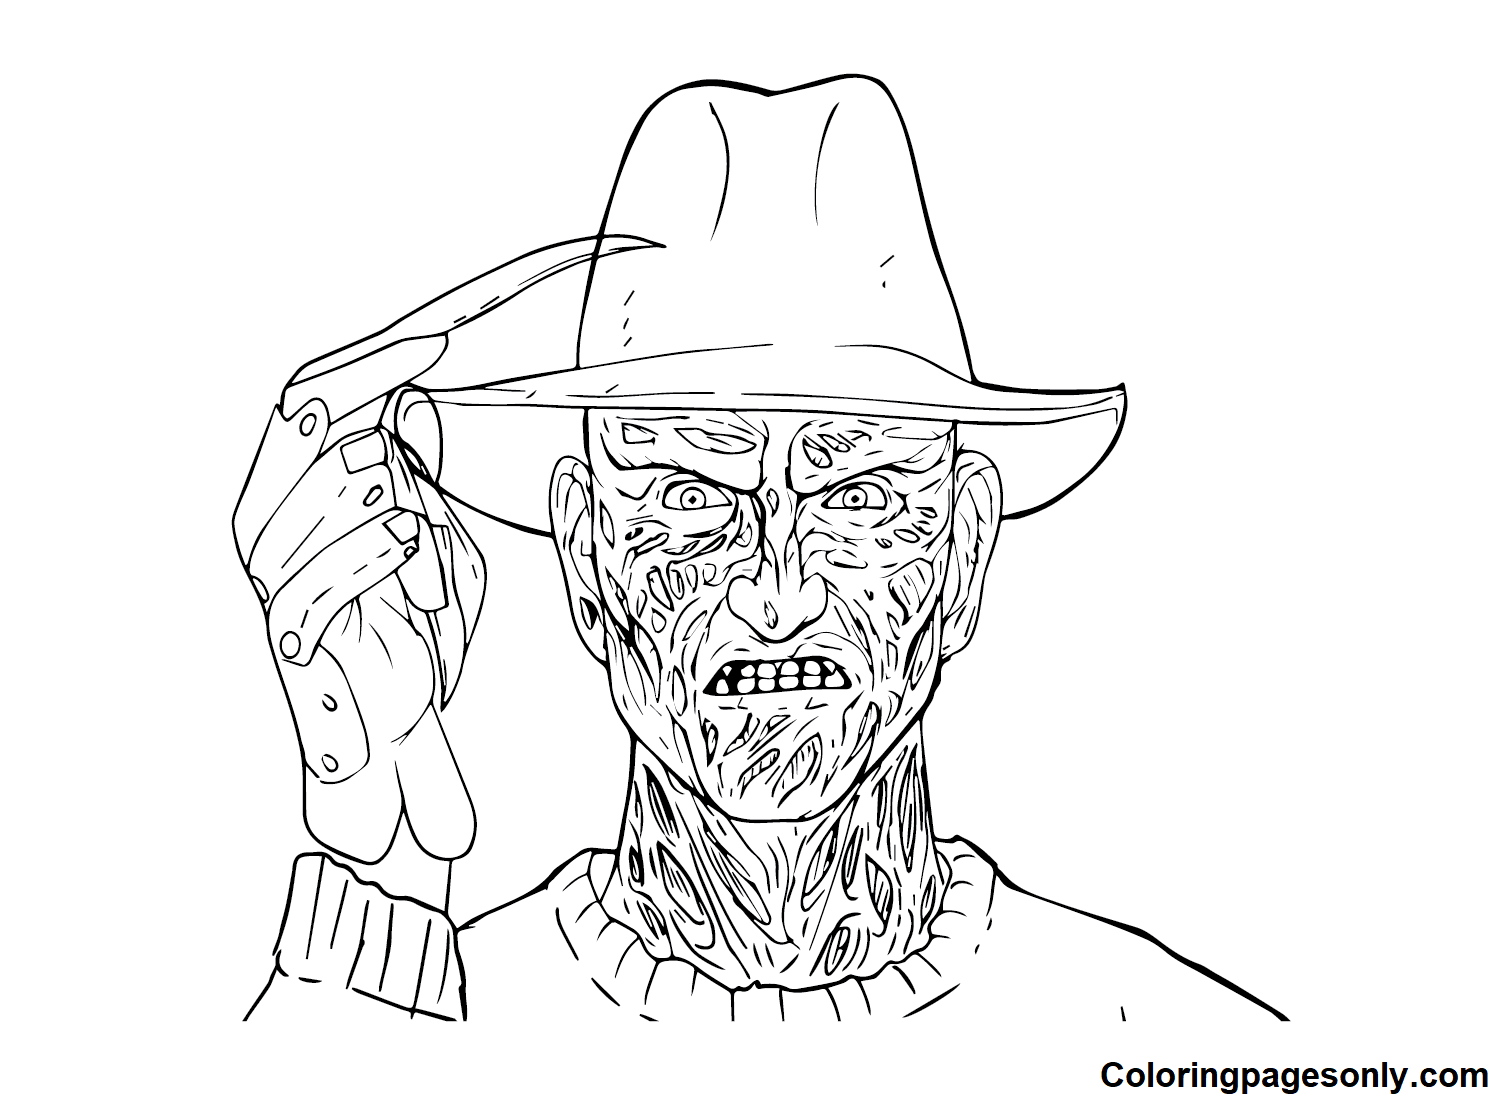 Freddy krueger coloring pages printable for free download